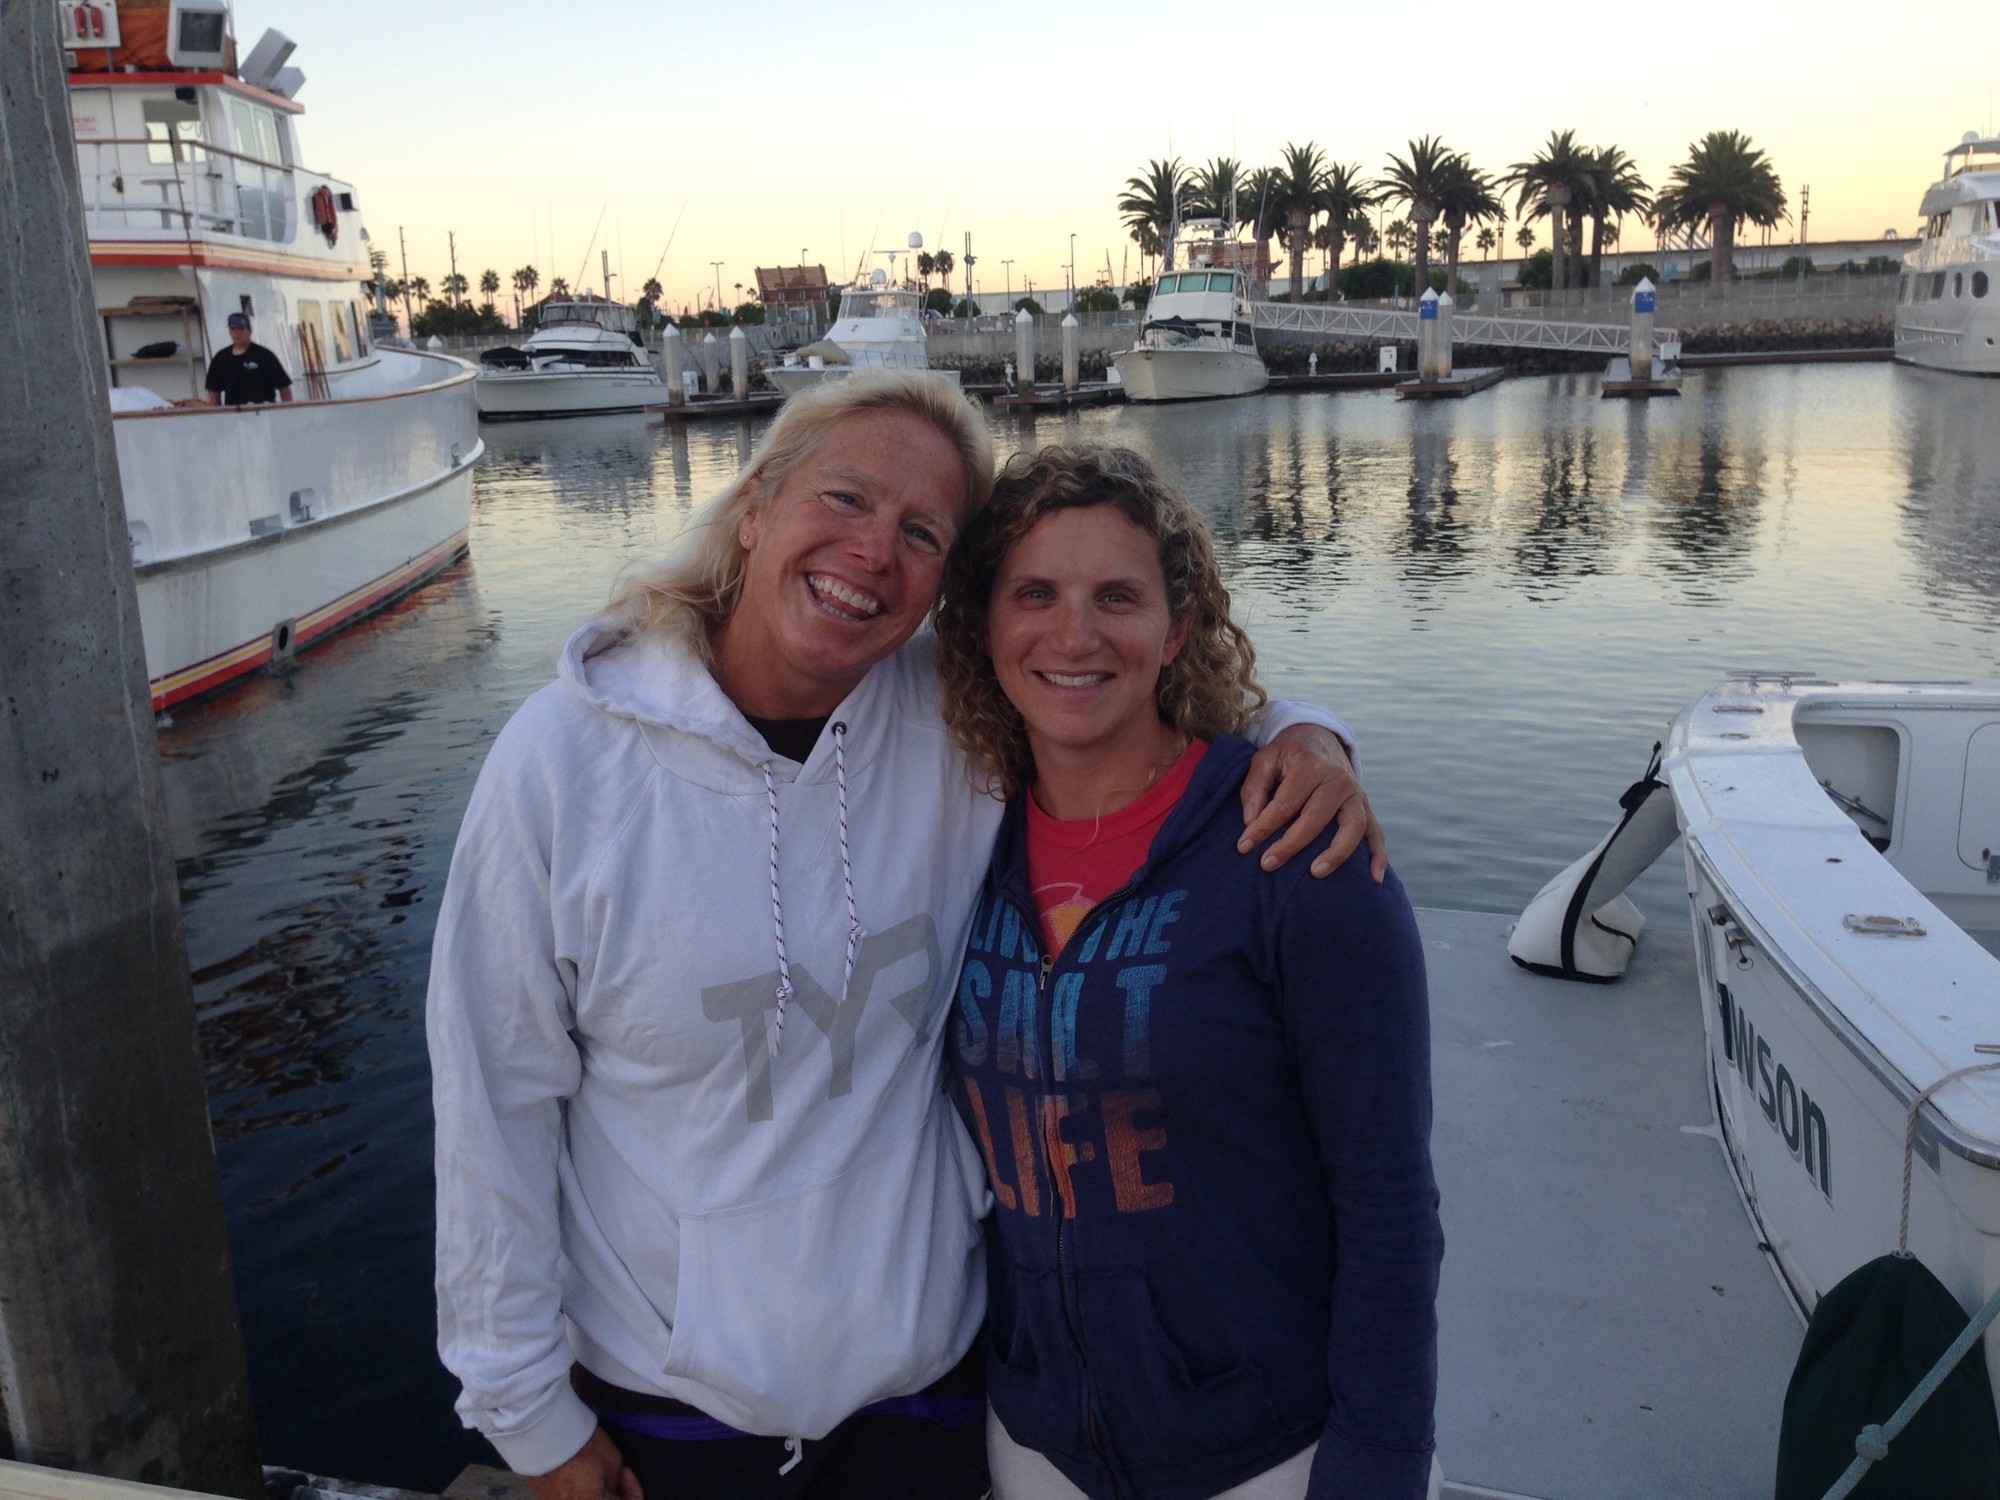 Tina Neill from the Catalina Channel Swimming Federation, left, and Lori King, who swam across the channel.